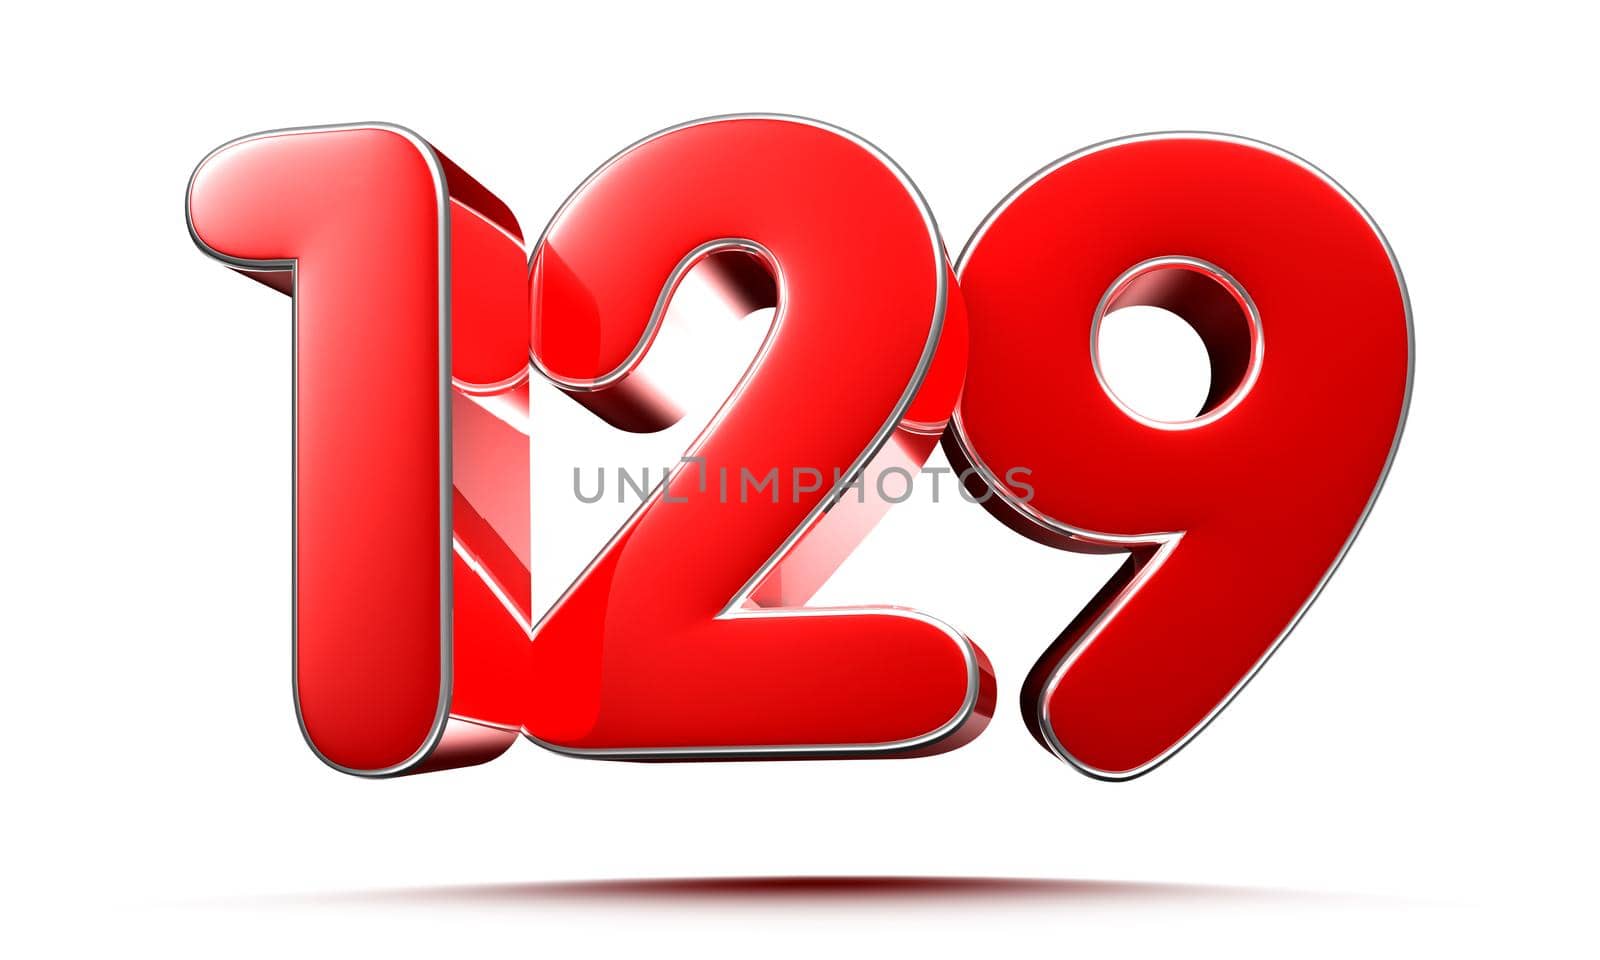 Rounded red numbers 129 on white background 3D illustration with clipping path by thitimontoyai